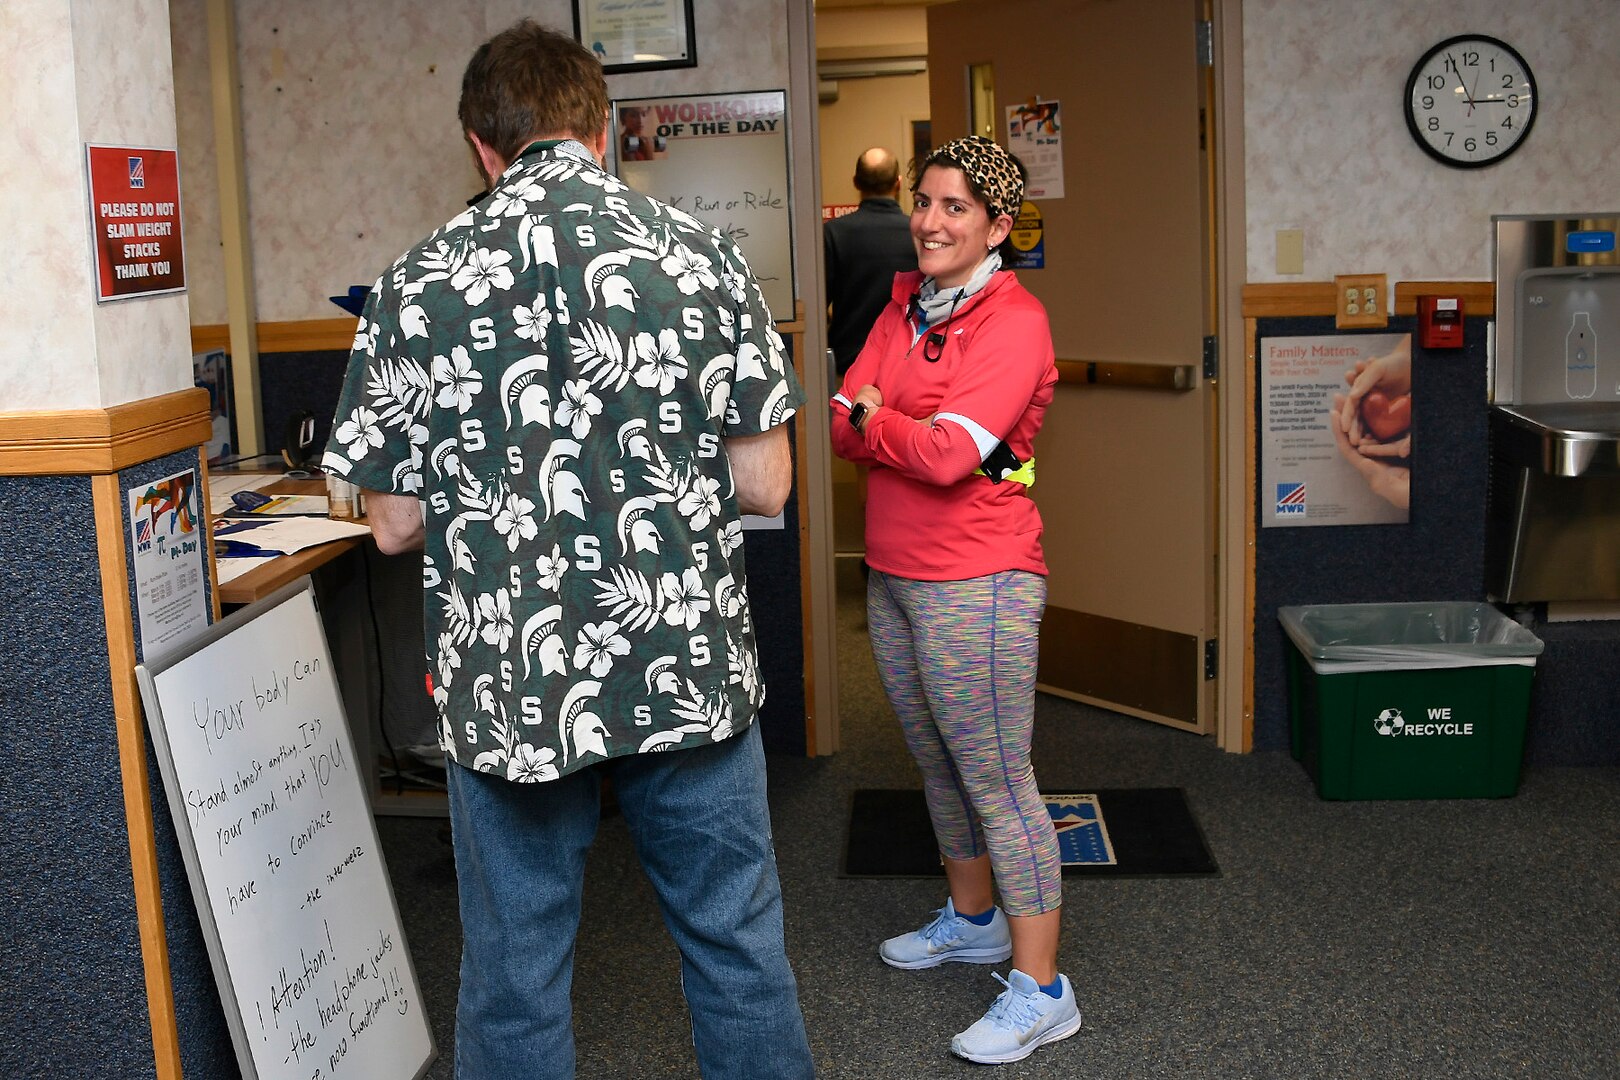 Runner (right) Jessica Waynick discusses her March 13 run for Pi Day with other Fitness Center patrons.